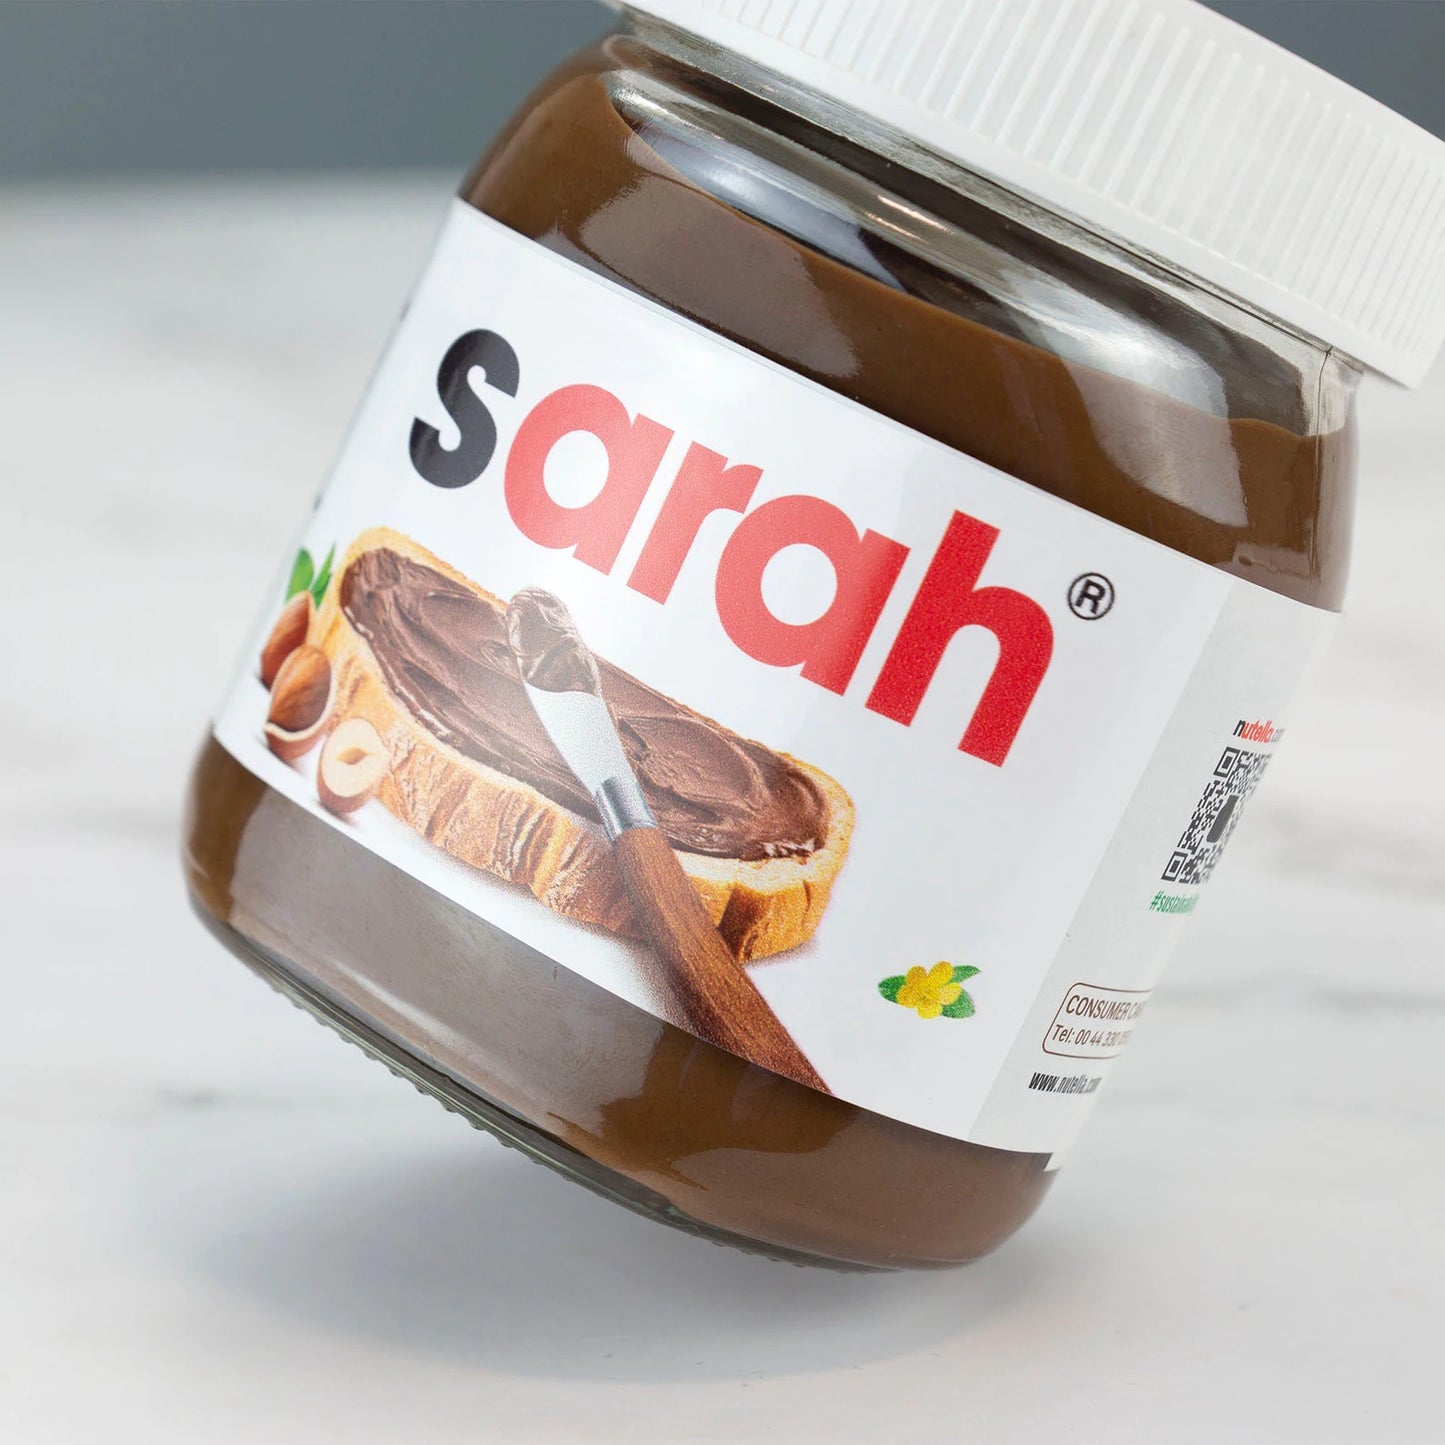 Personalized Chocolate Spread